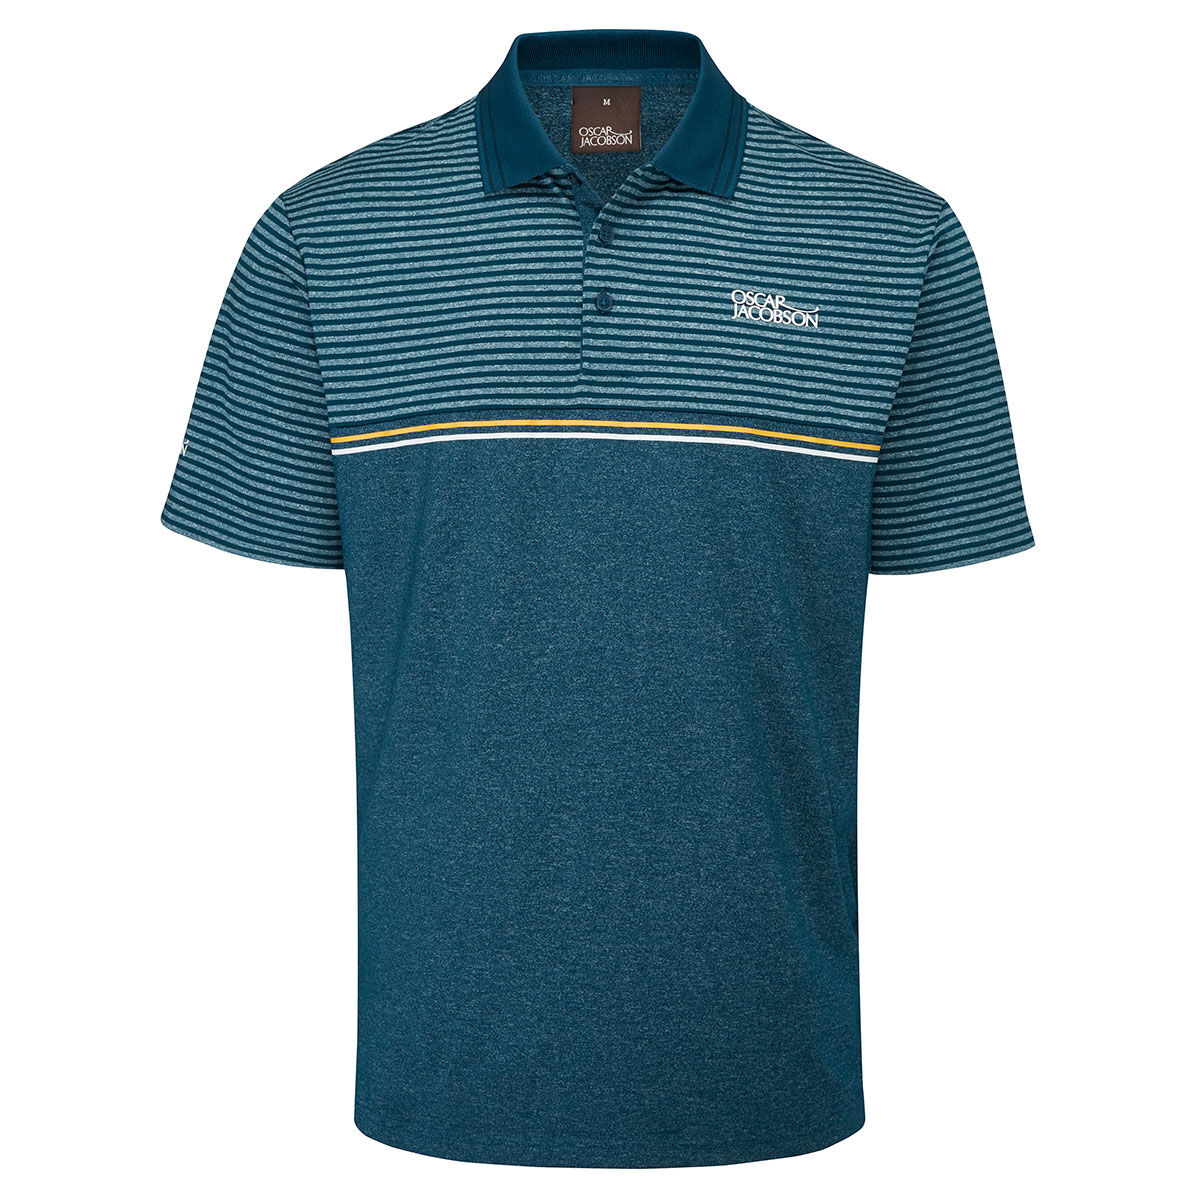 Oscar Jacobson Mens Blue, White and Yellow Lightweight Stripe Whitby Golf Polo Shirt, Size: Small | American Golf